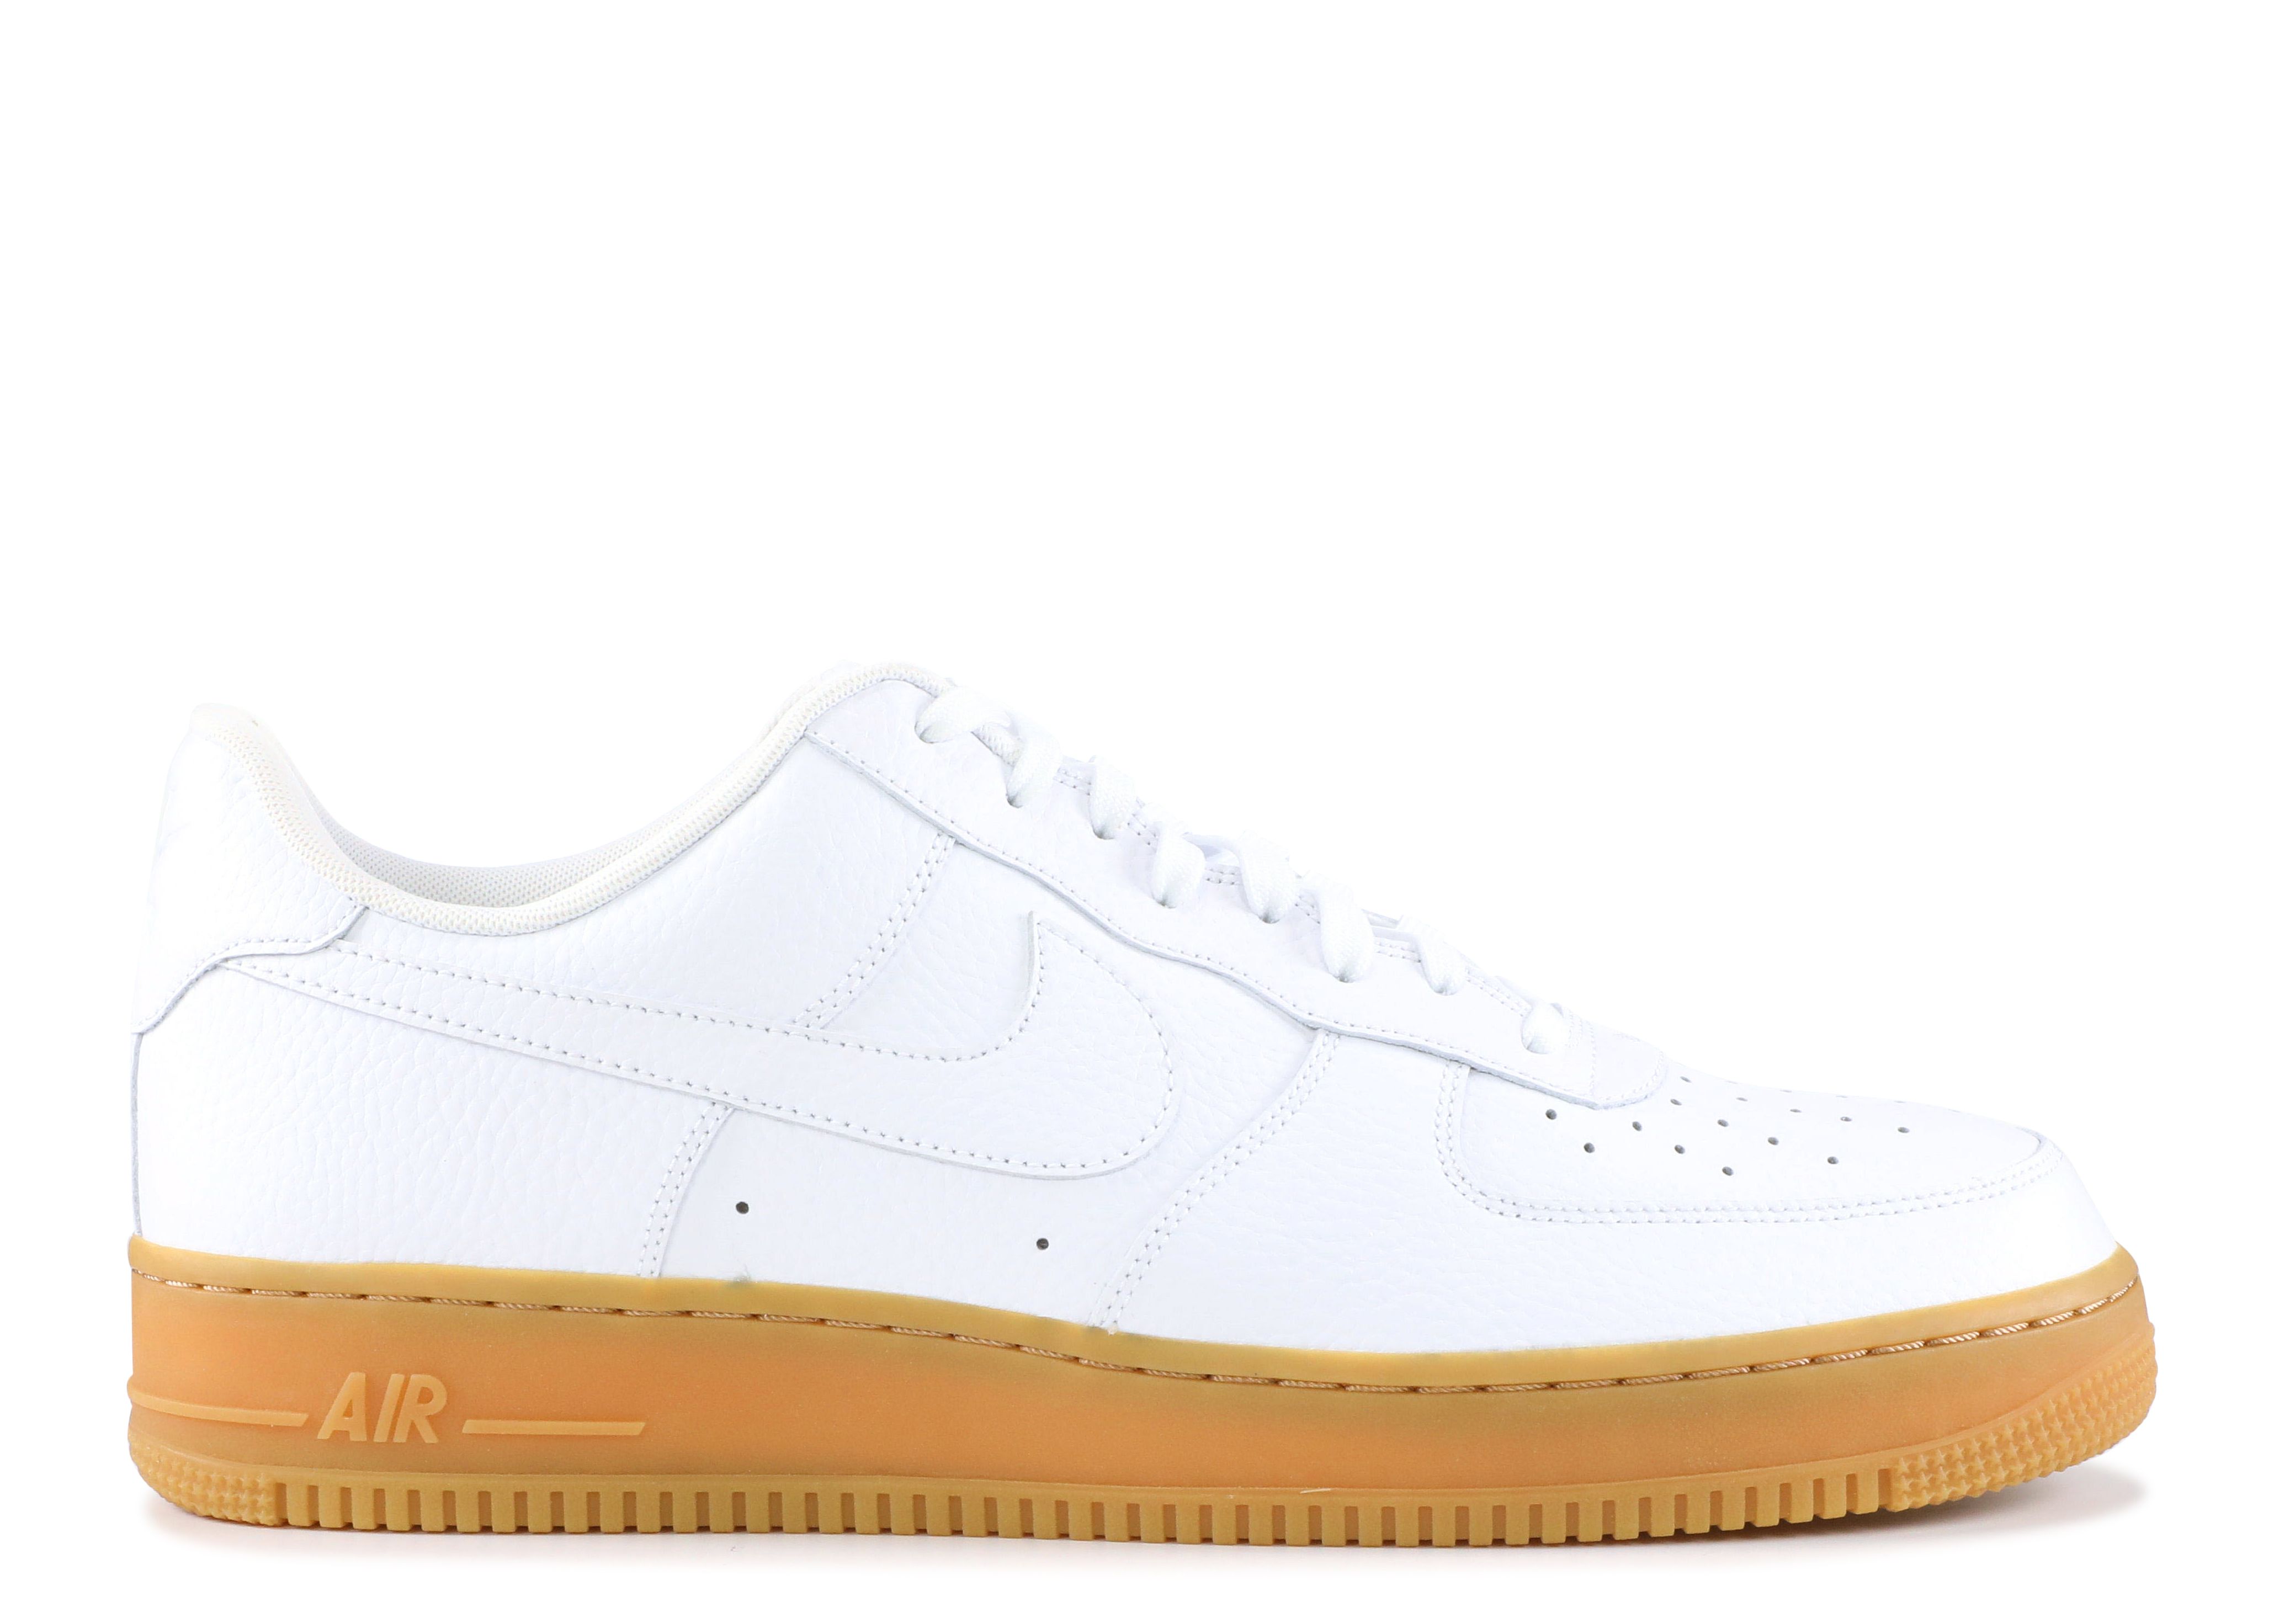 Bathroom housewife instance Air Force 1 Low - Nike - 488298 159 - white/white-gum light brown | Flight  Club